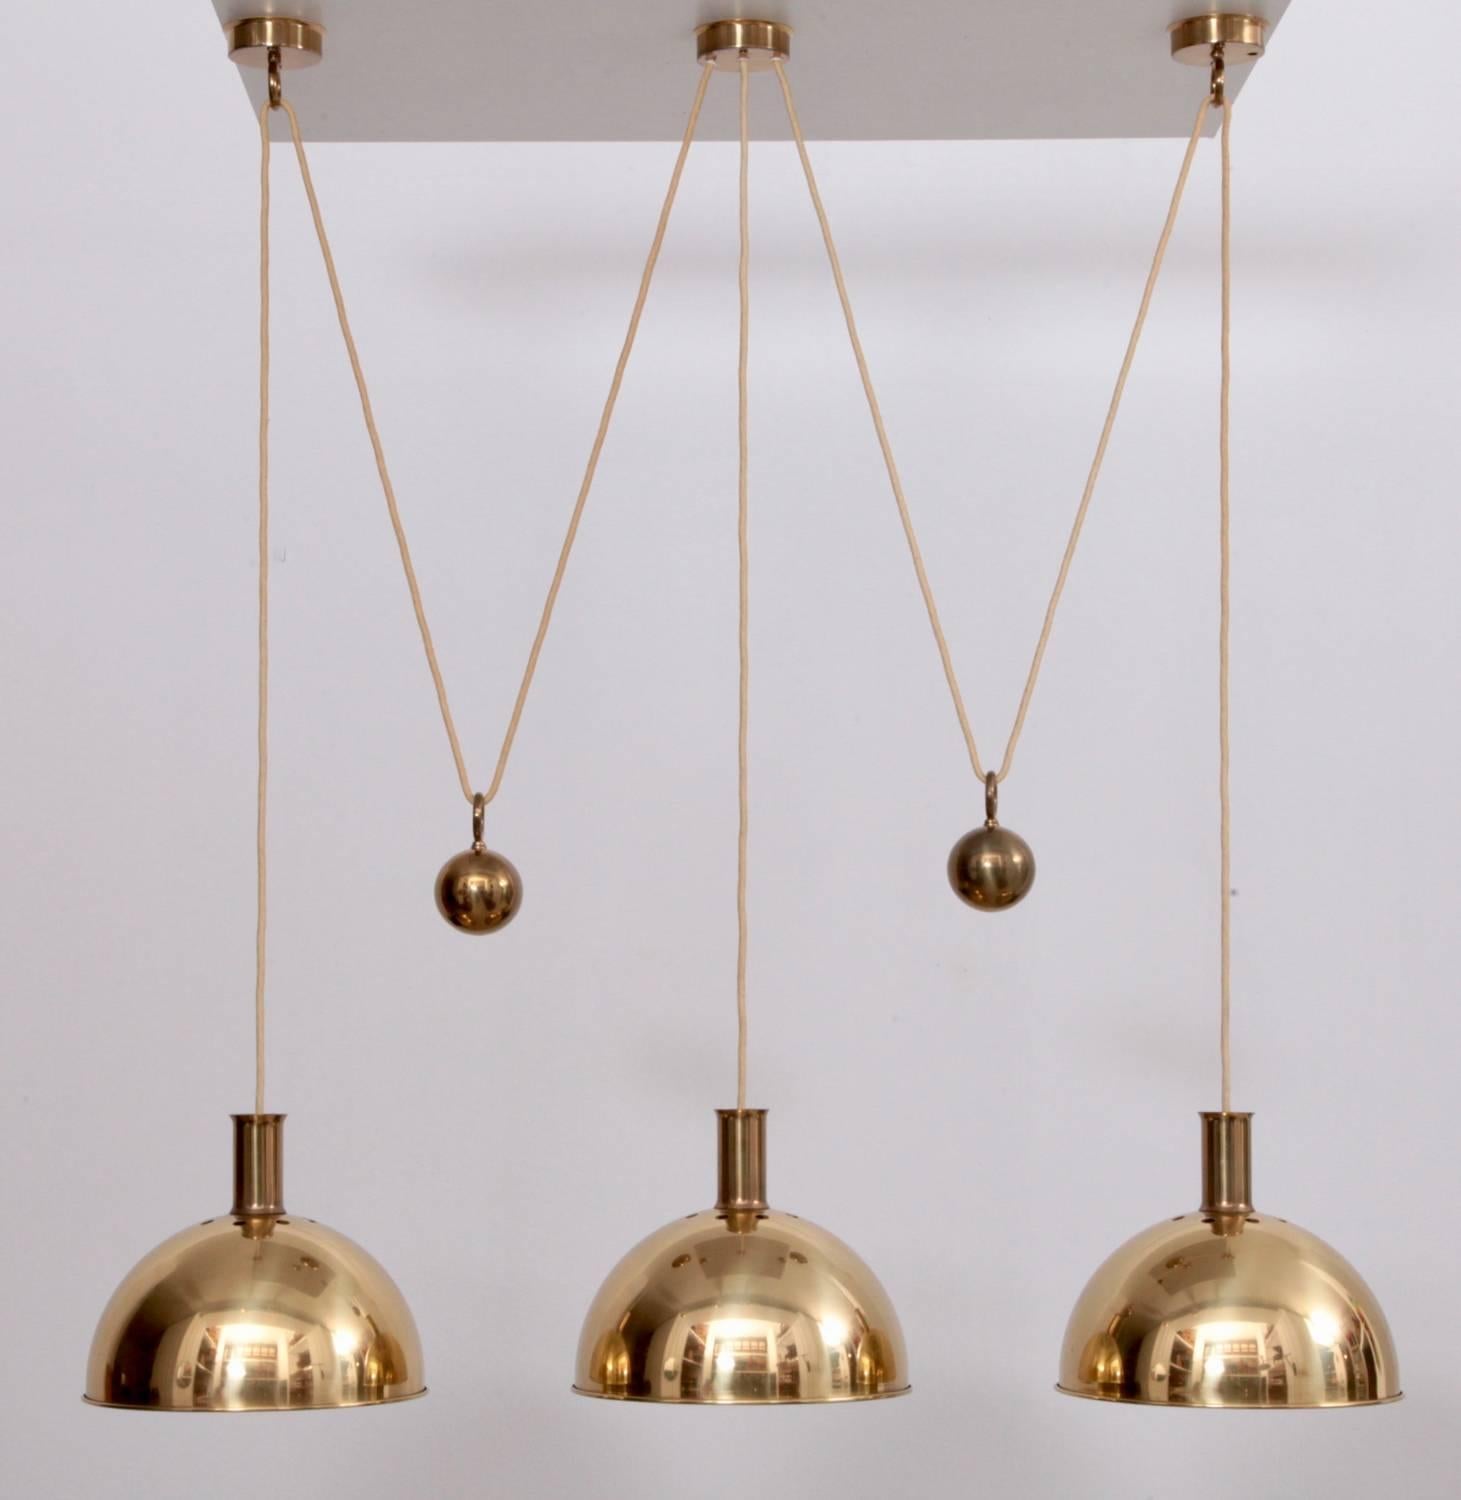 Really beautiful Florian Schulz triple posa pendant lamp with 1 x E 27 / model A bulb in each polished brass shade.